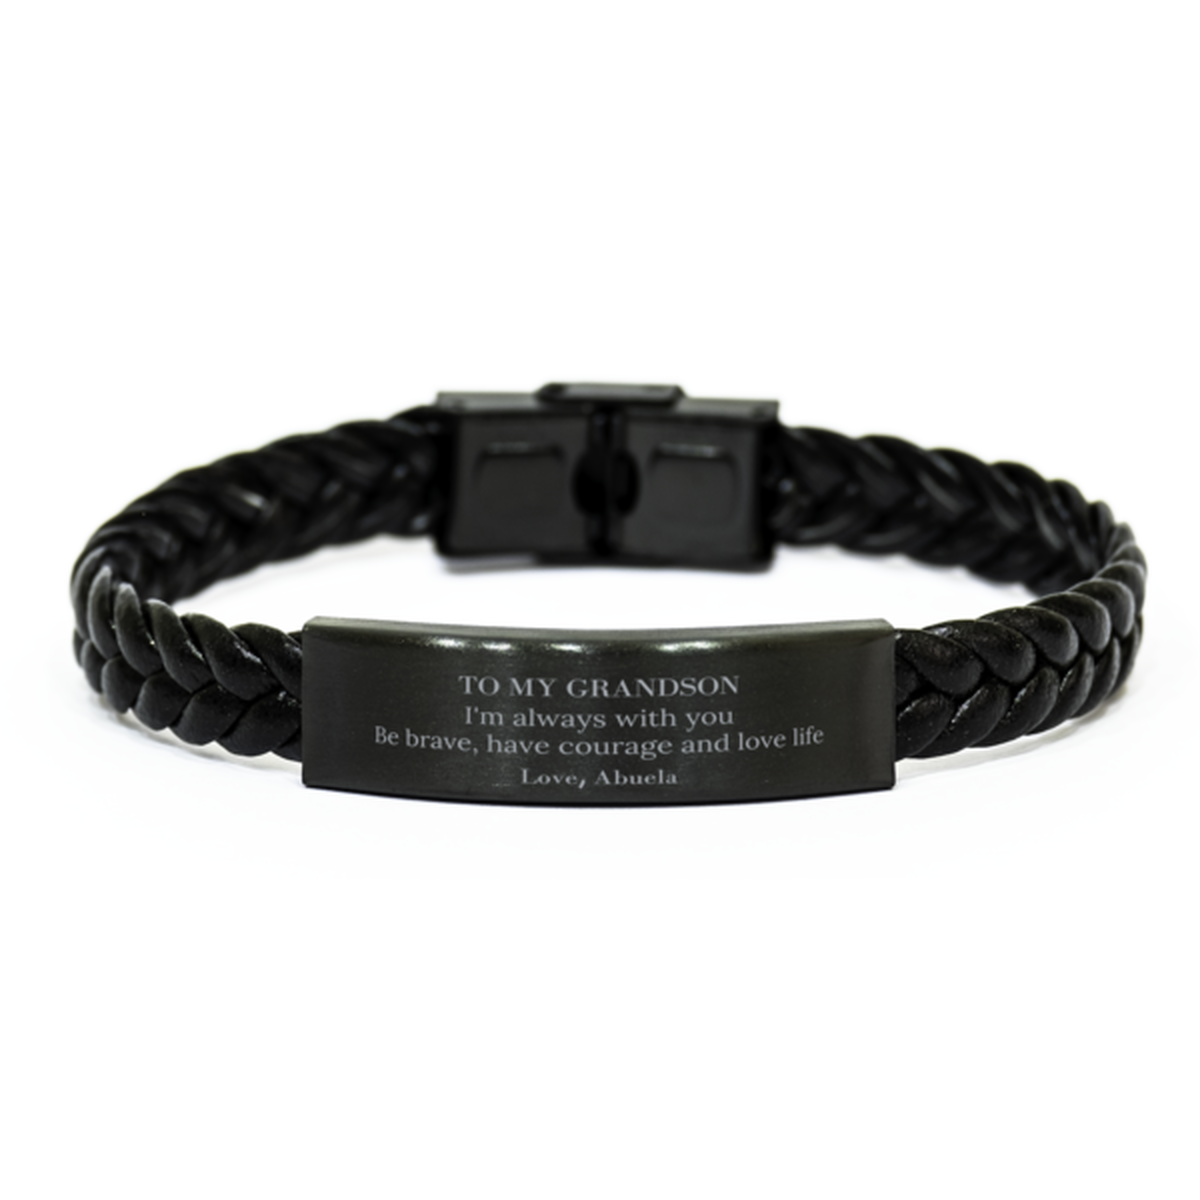 To My Grandson Gifts from Abuela, Unique Braided Leather Bracelet Inspirational Christmas Birthday Graduation Gifts for Grandson I'm always with you. Be brave, have courage and love life. Love, Abuela